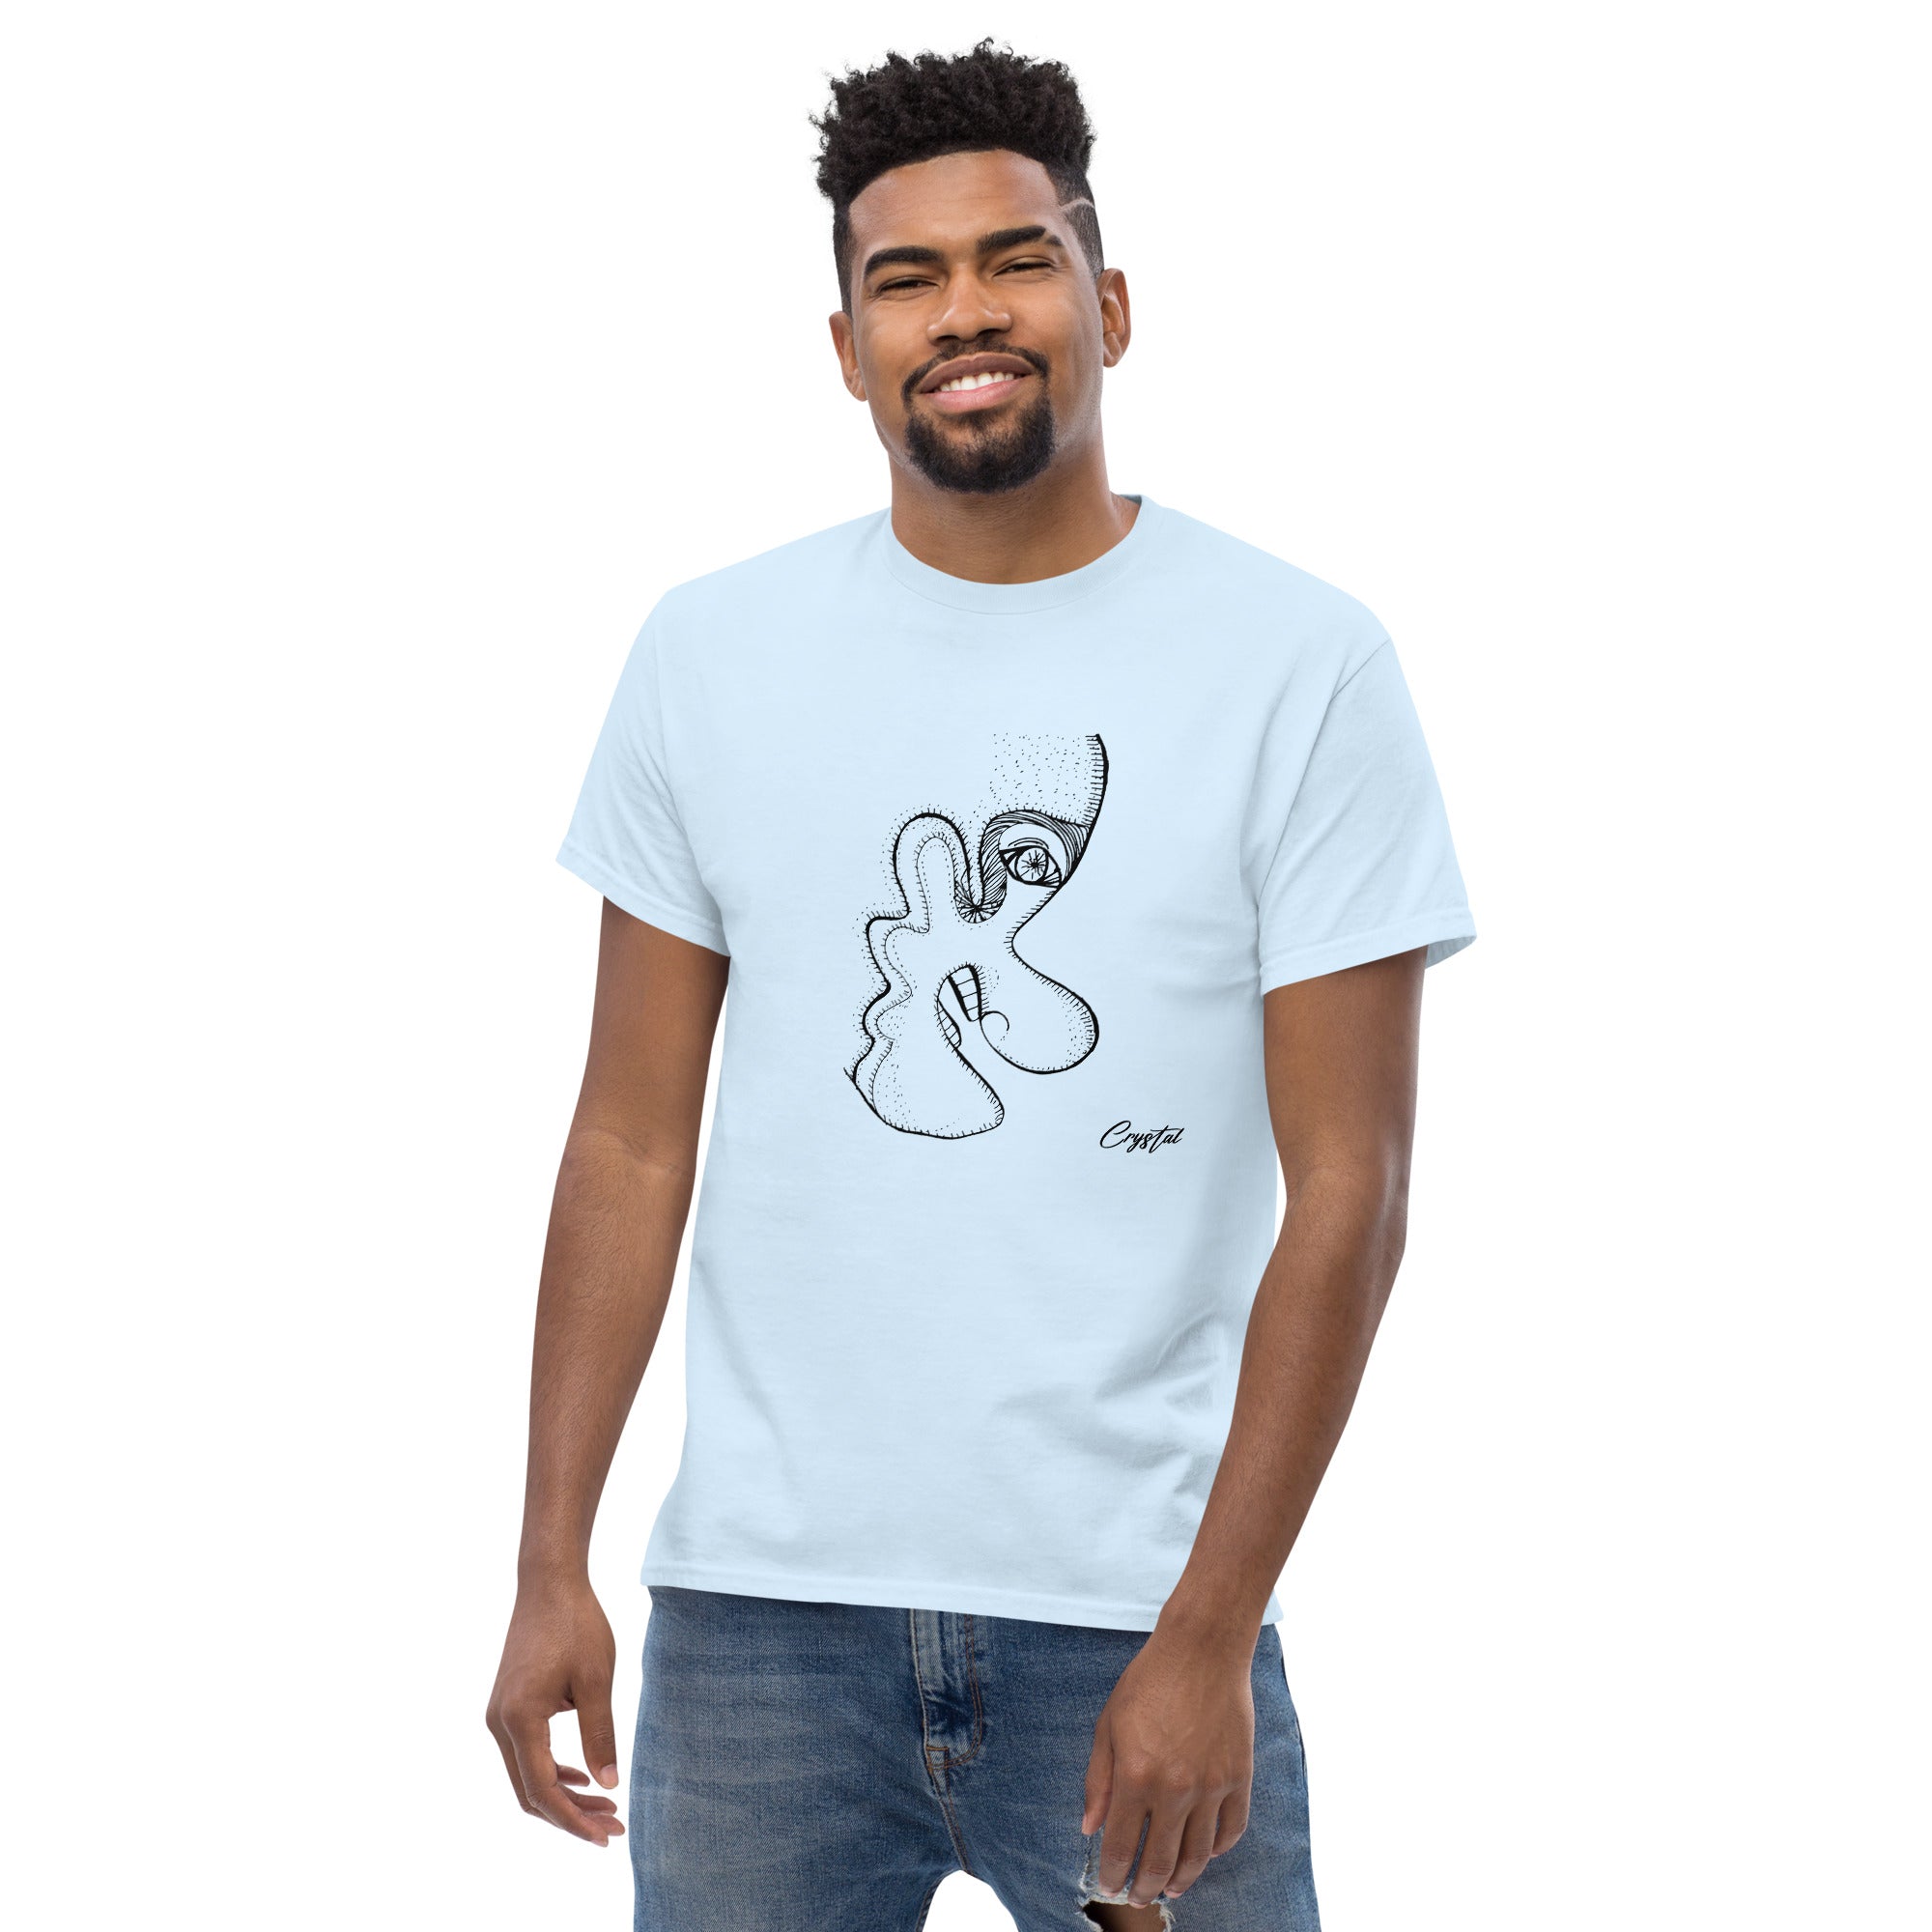 Older Man or Woman's Profile with Big Teeth and Big Nose - Cute & Creepy "Stay Weird" Cartoon Illustration Men's classic tee